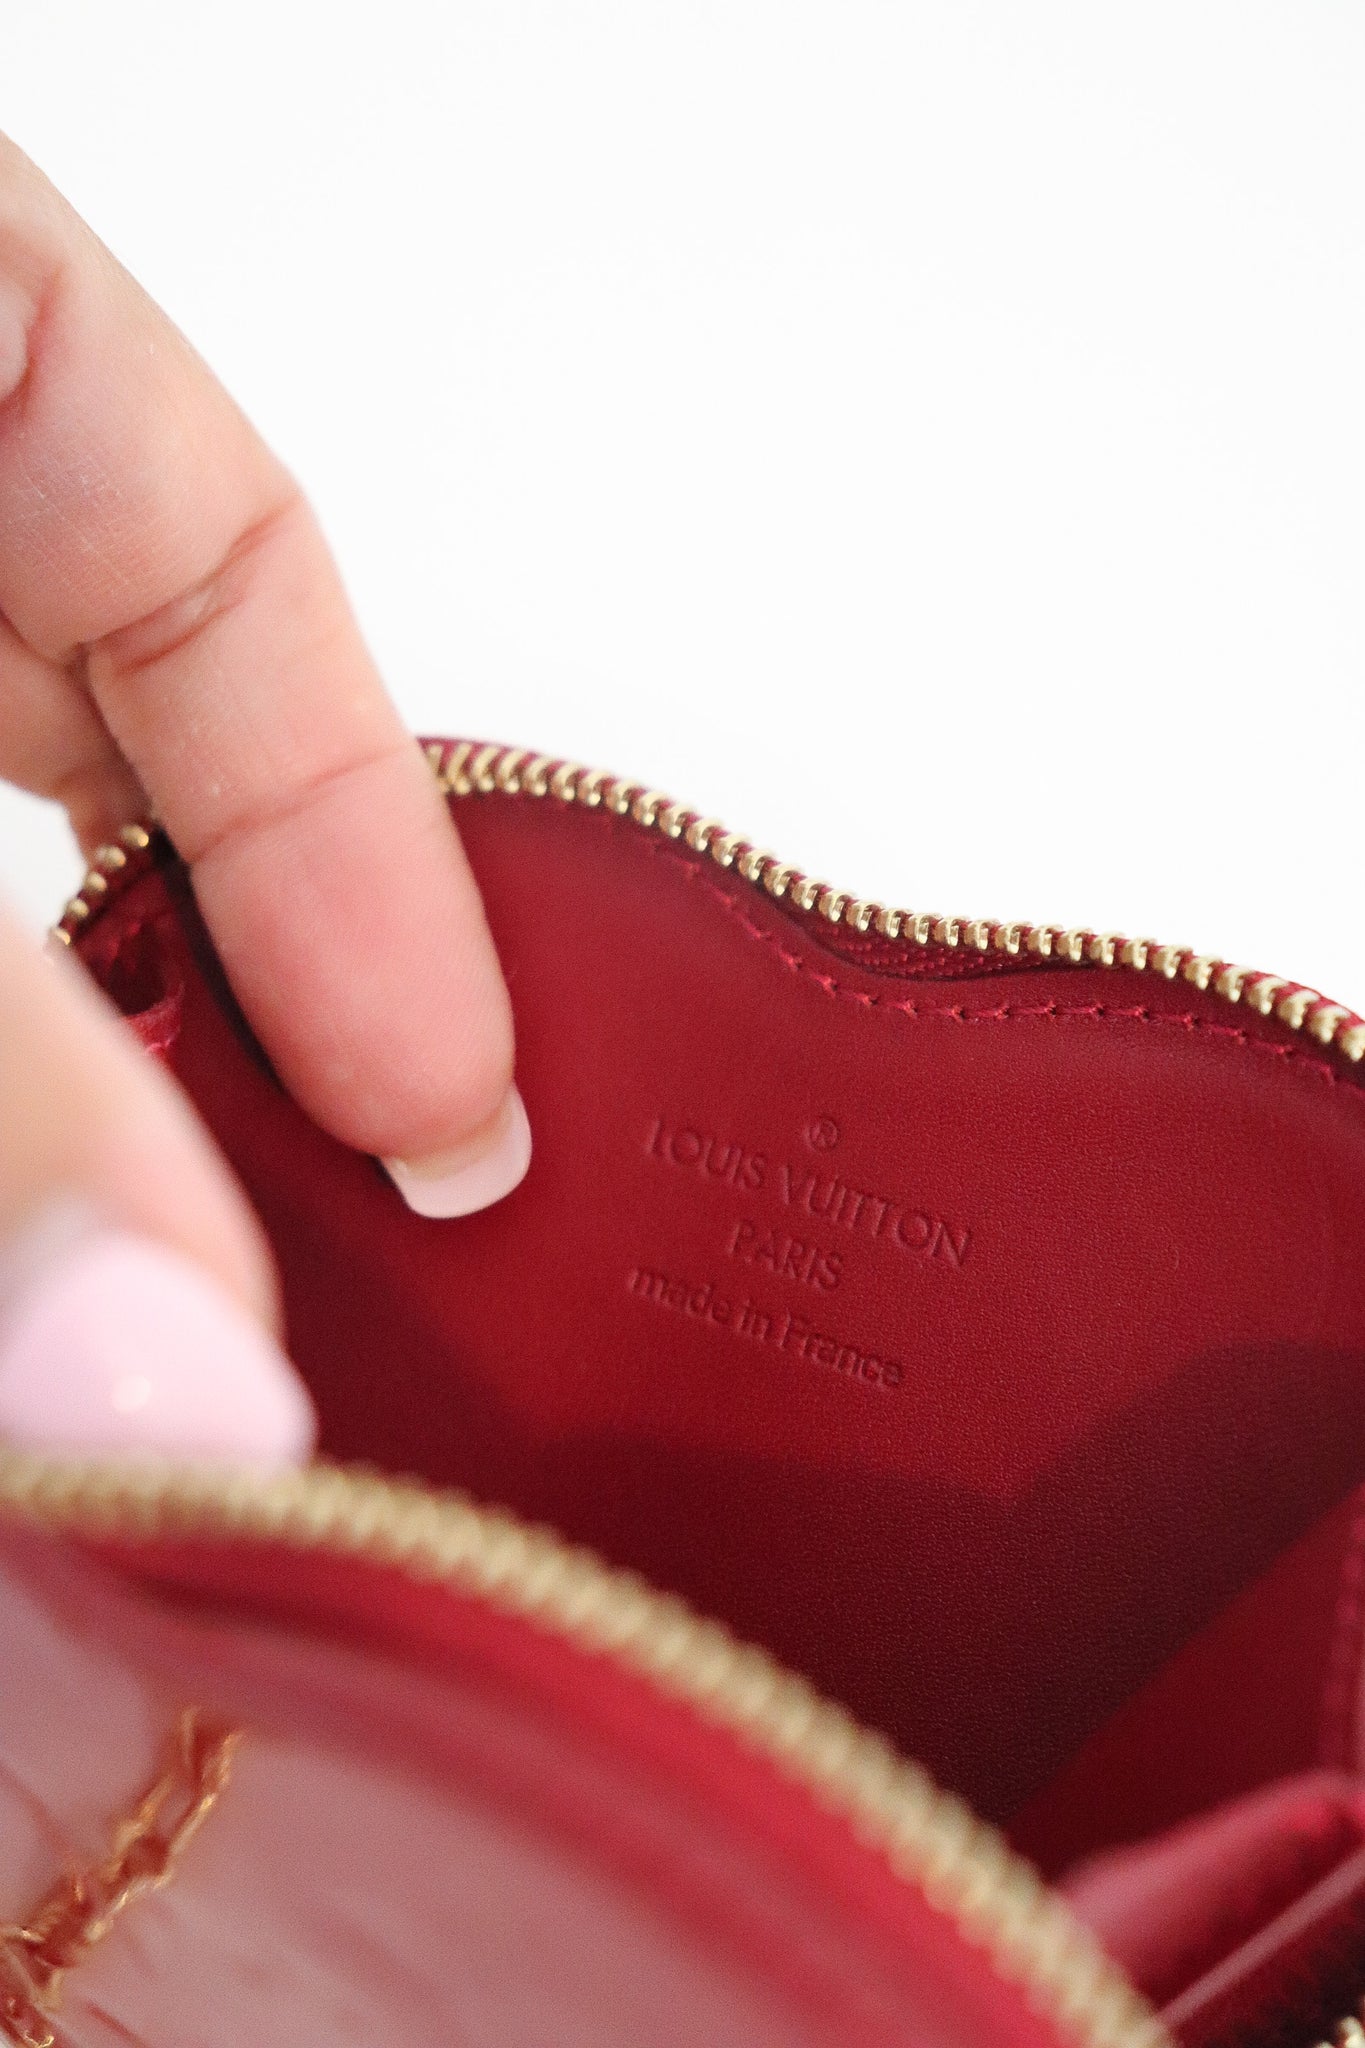 Auth Louis Vuitton Red Key Pouch VERNIS Leather